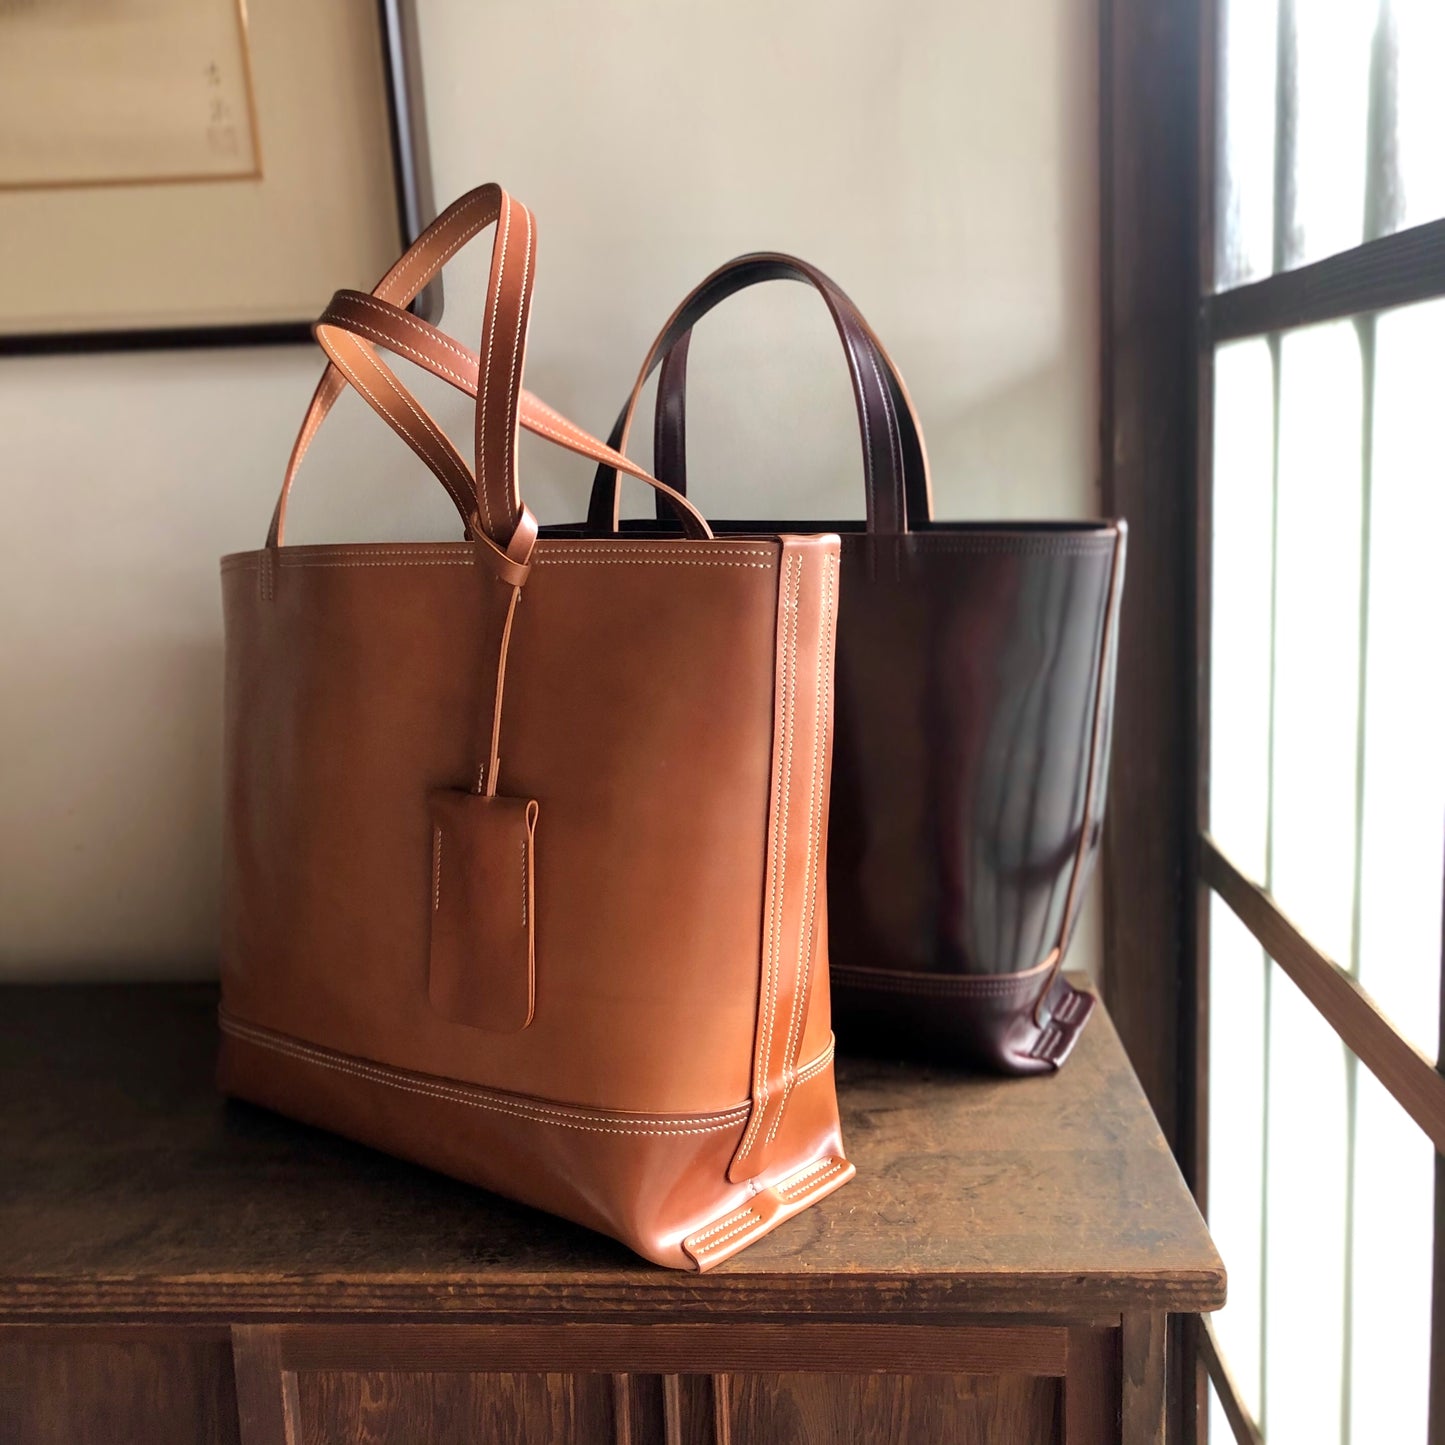 Shell Tote【Horween】シェルコードバンのトートバッグ